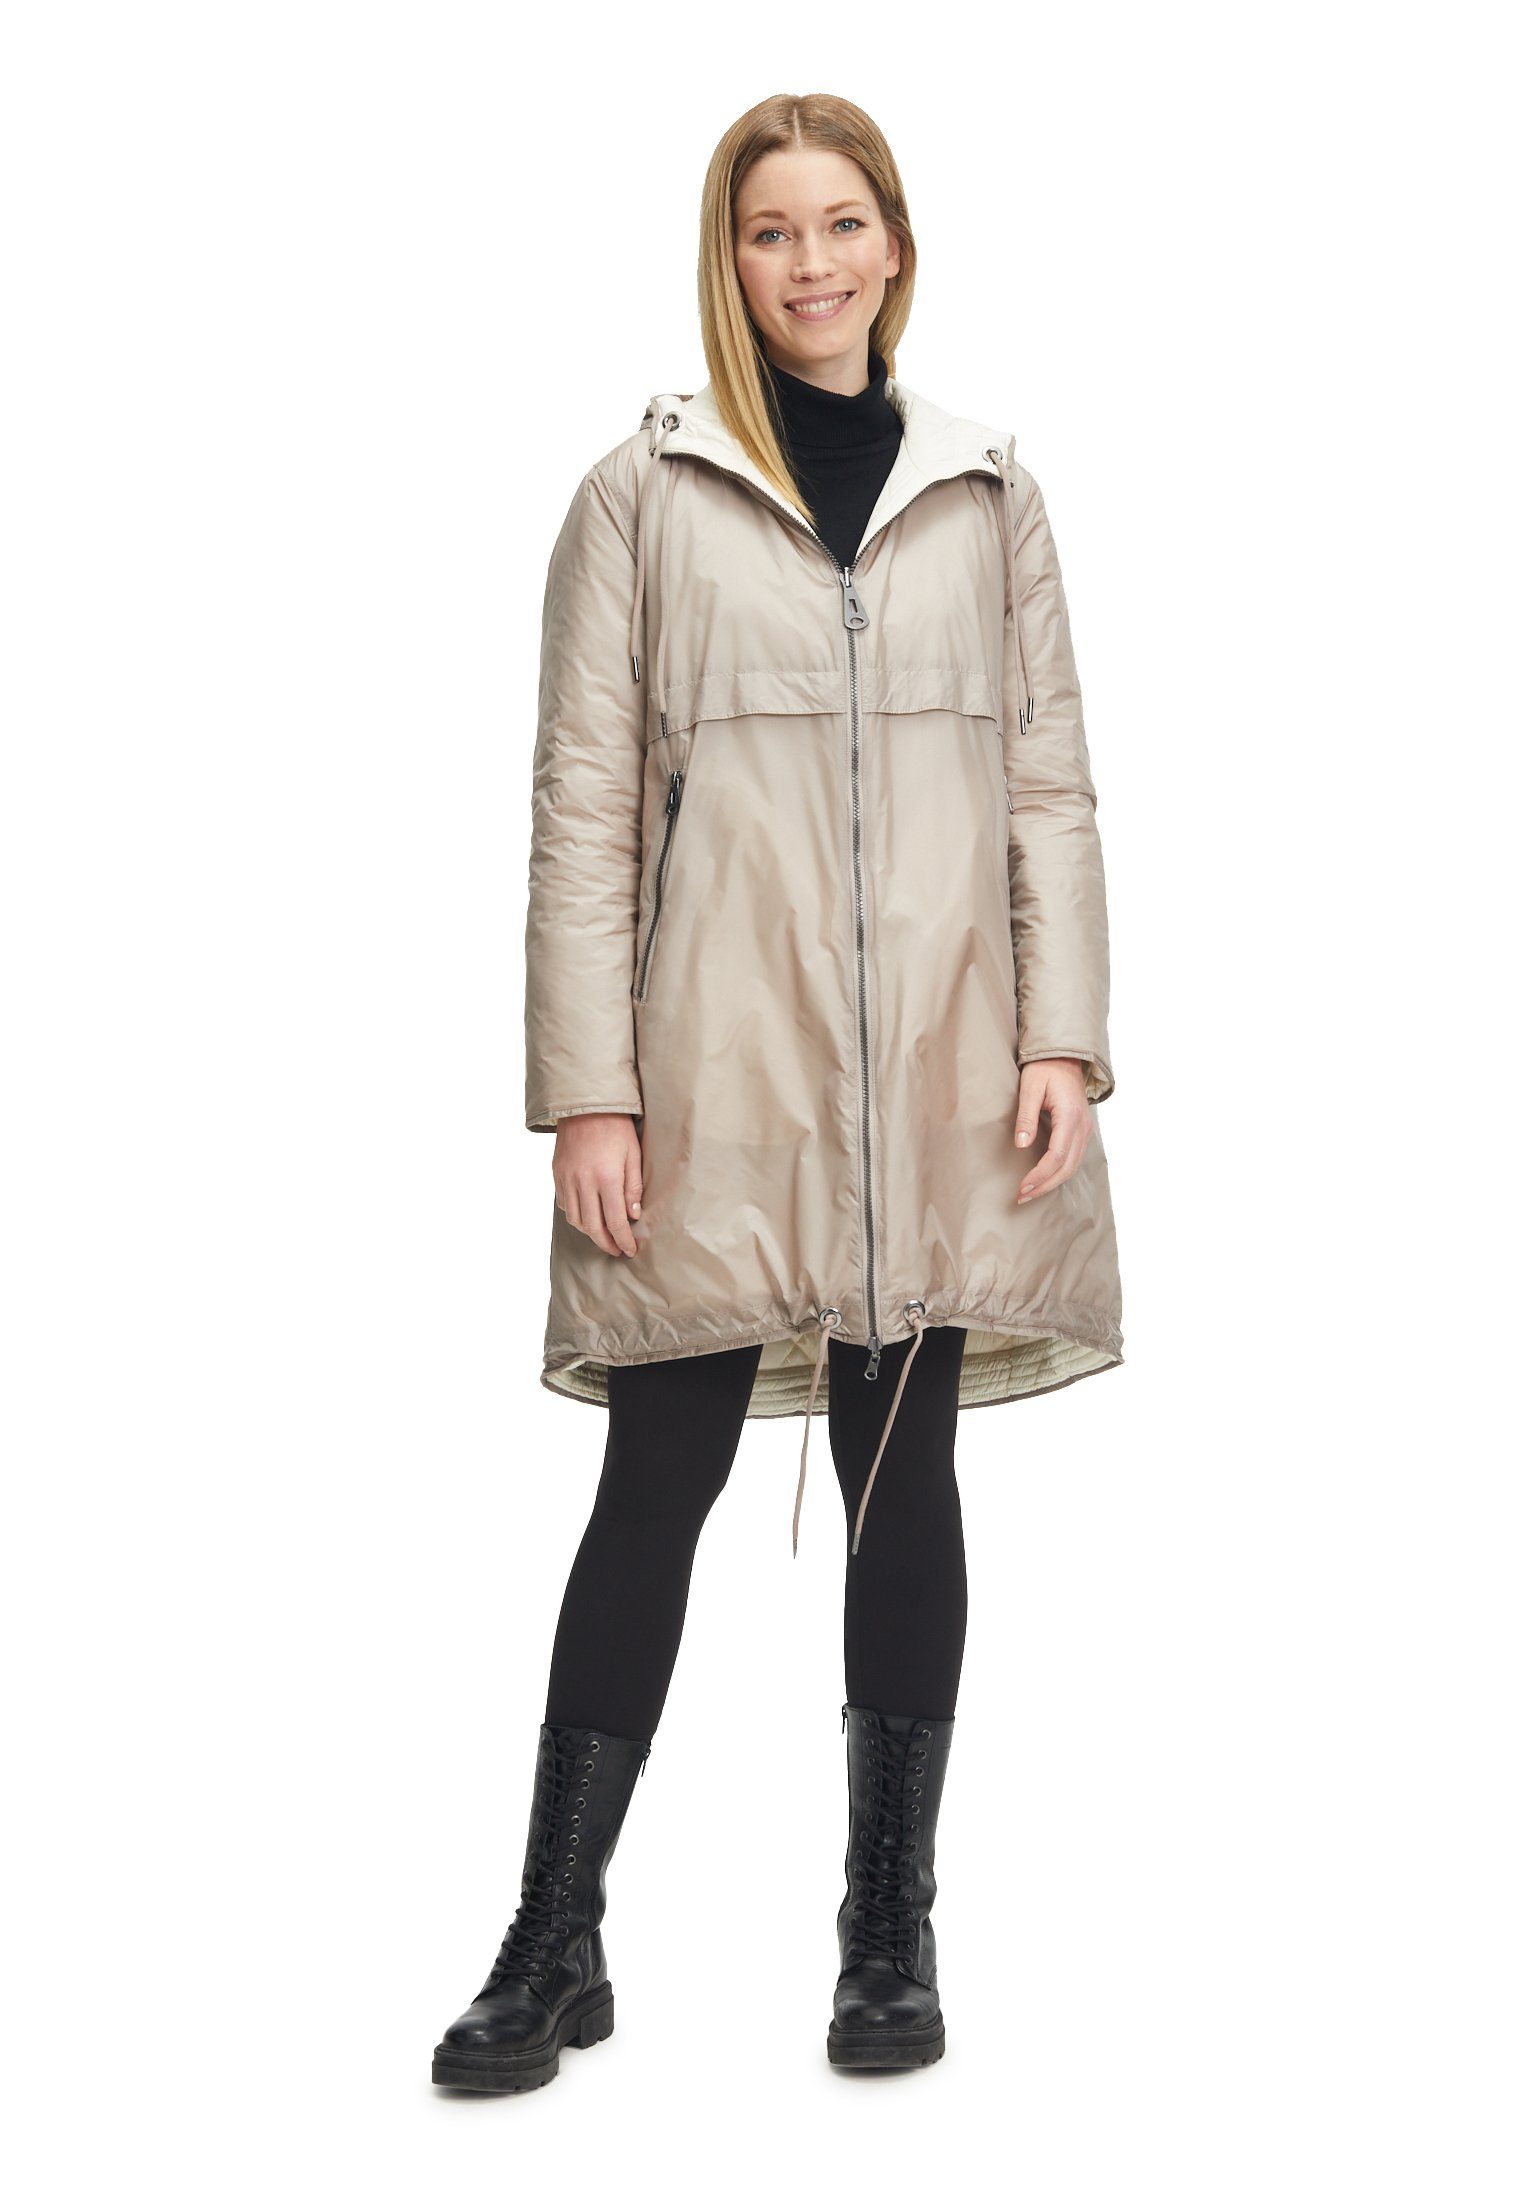 Betty Barclay Steppjacke mit Kapuze Materialmix Pale Taupe